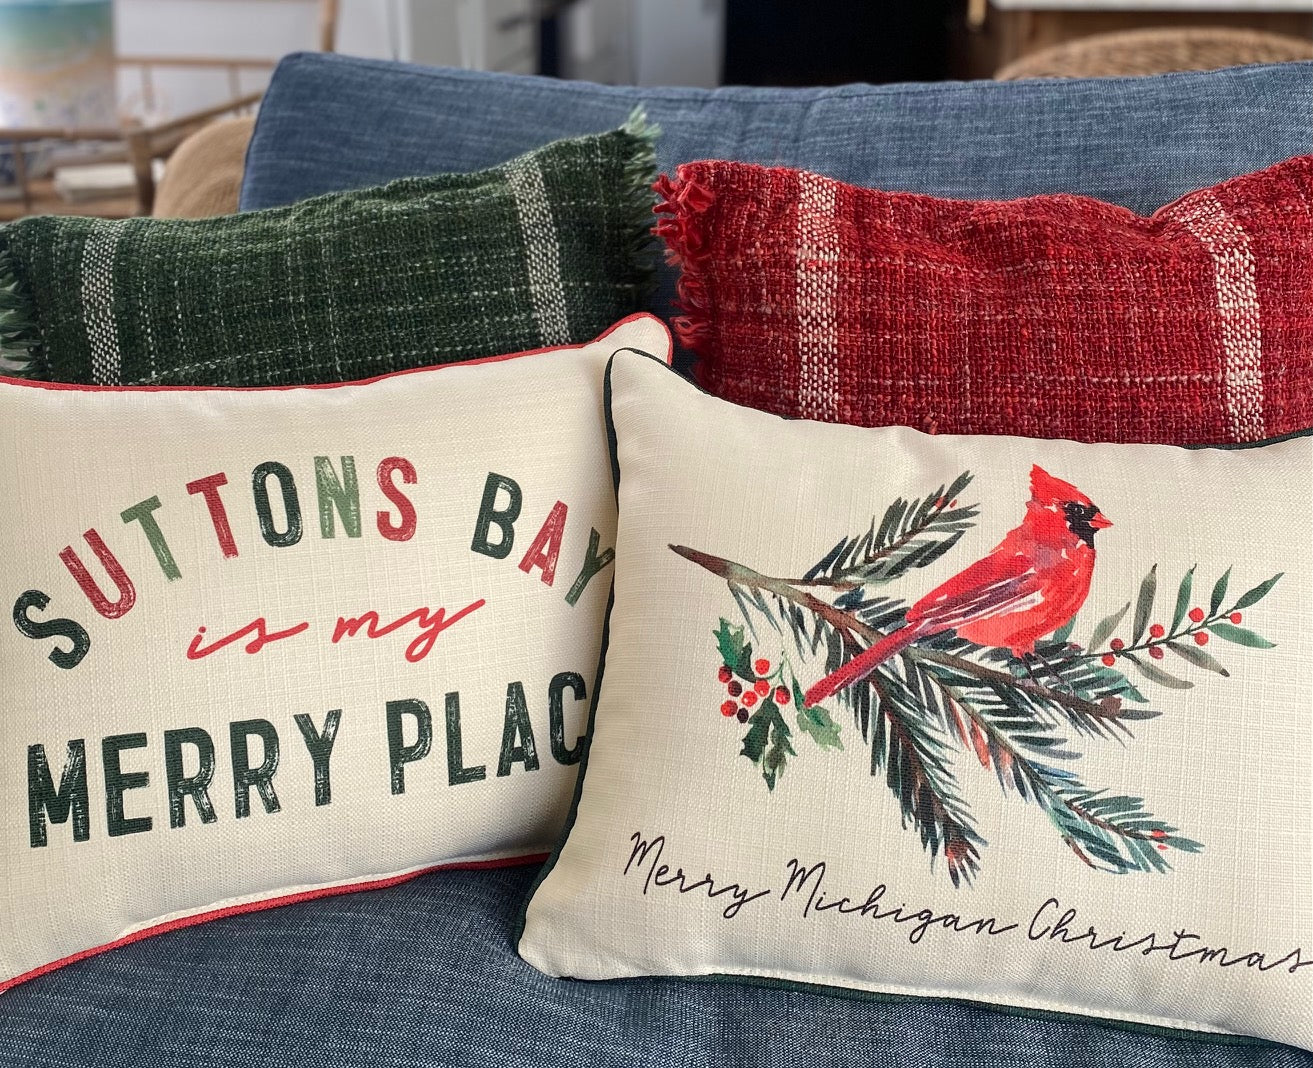 Michigan Christmas Pillows – The Front Porch Suttons Bay